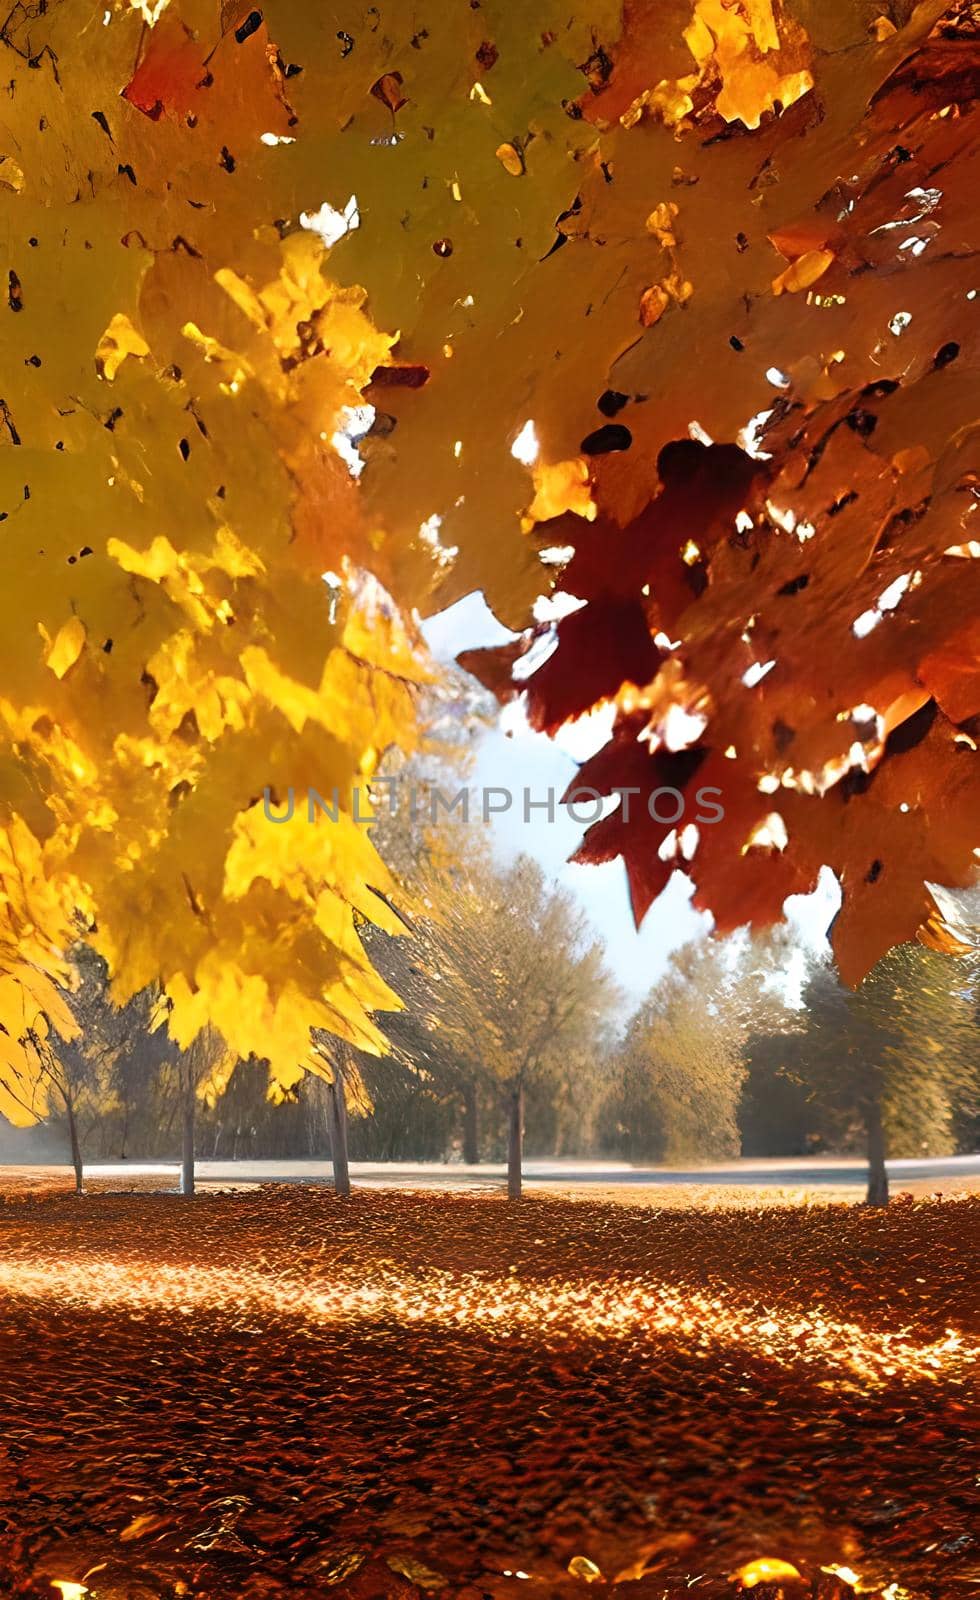 Autumn season and trees in nature